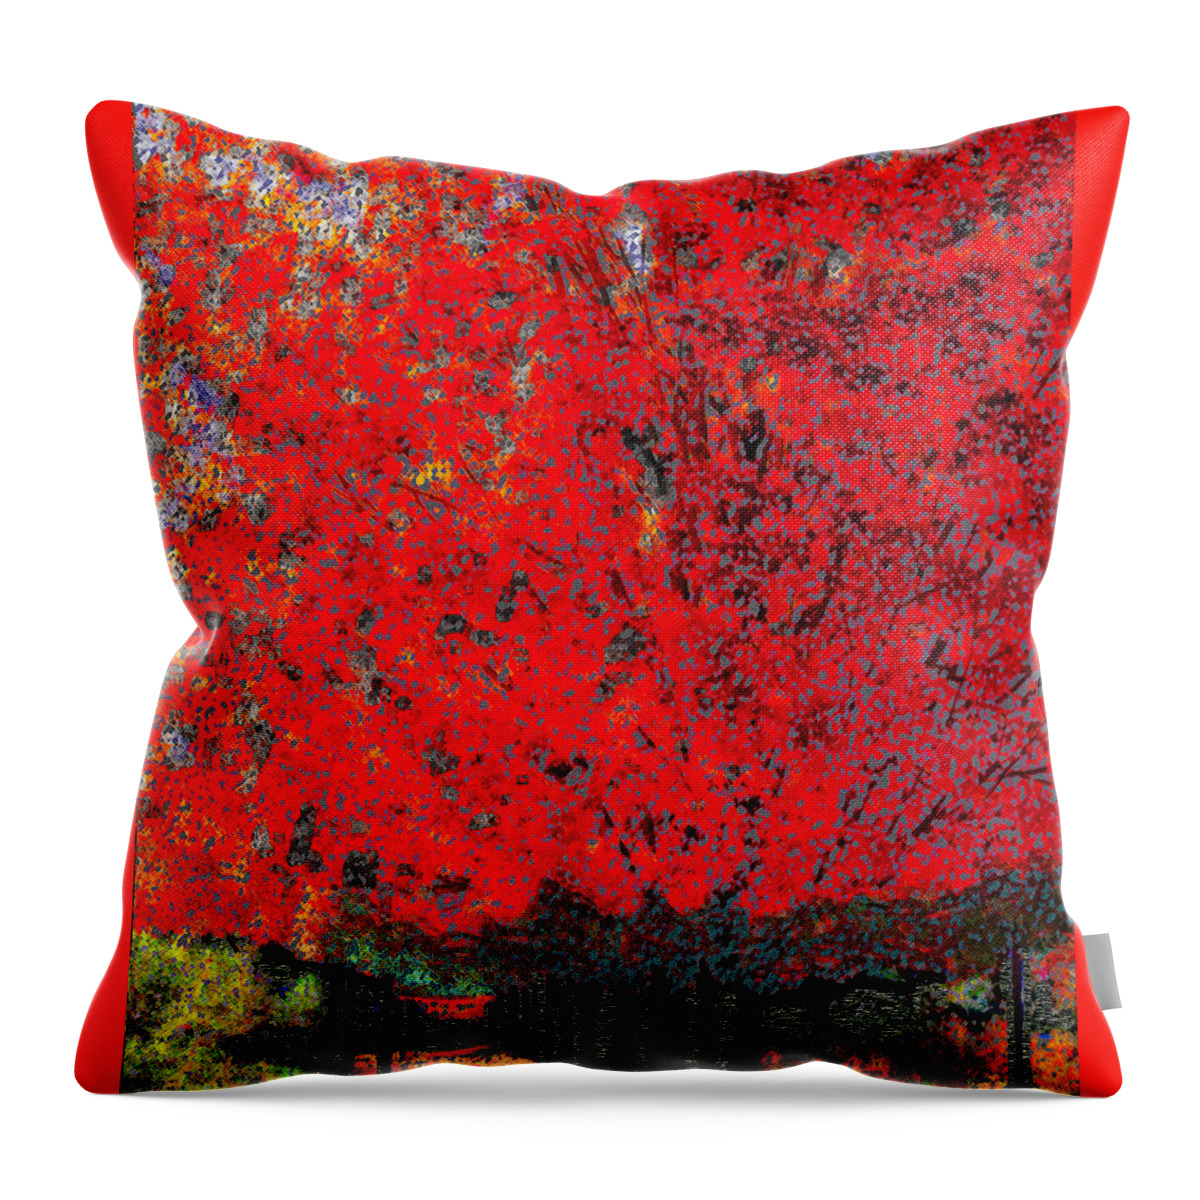 Asheville Throw Pillow featuring the digital art Orange Mountain Tree by Rod Whyte